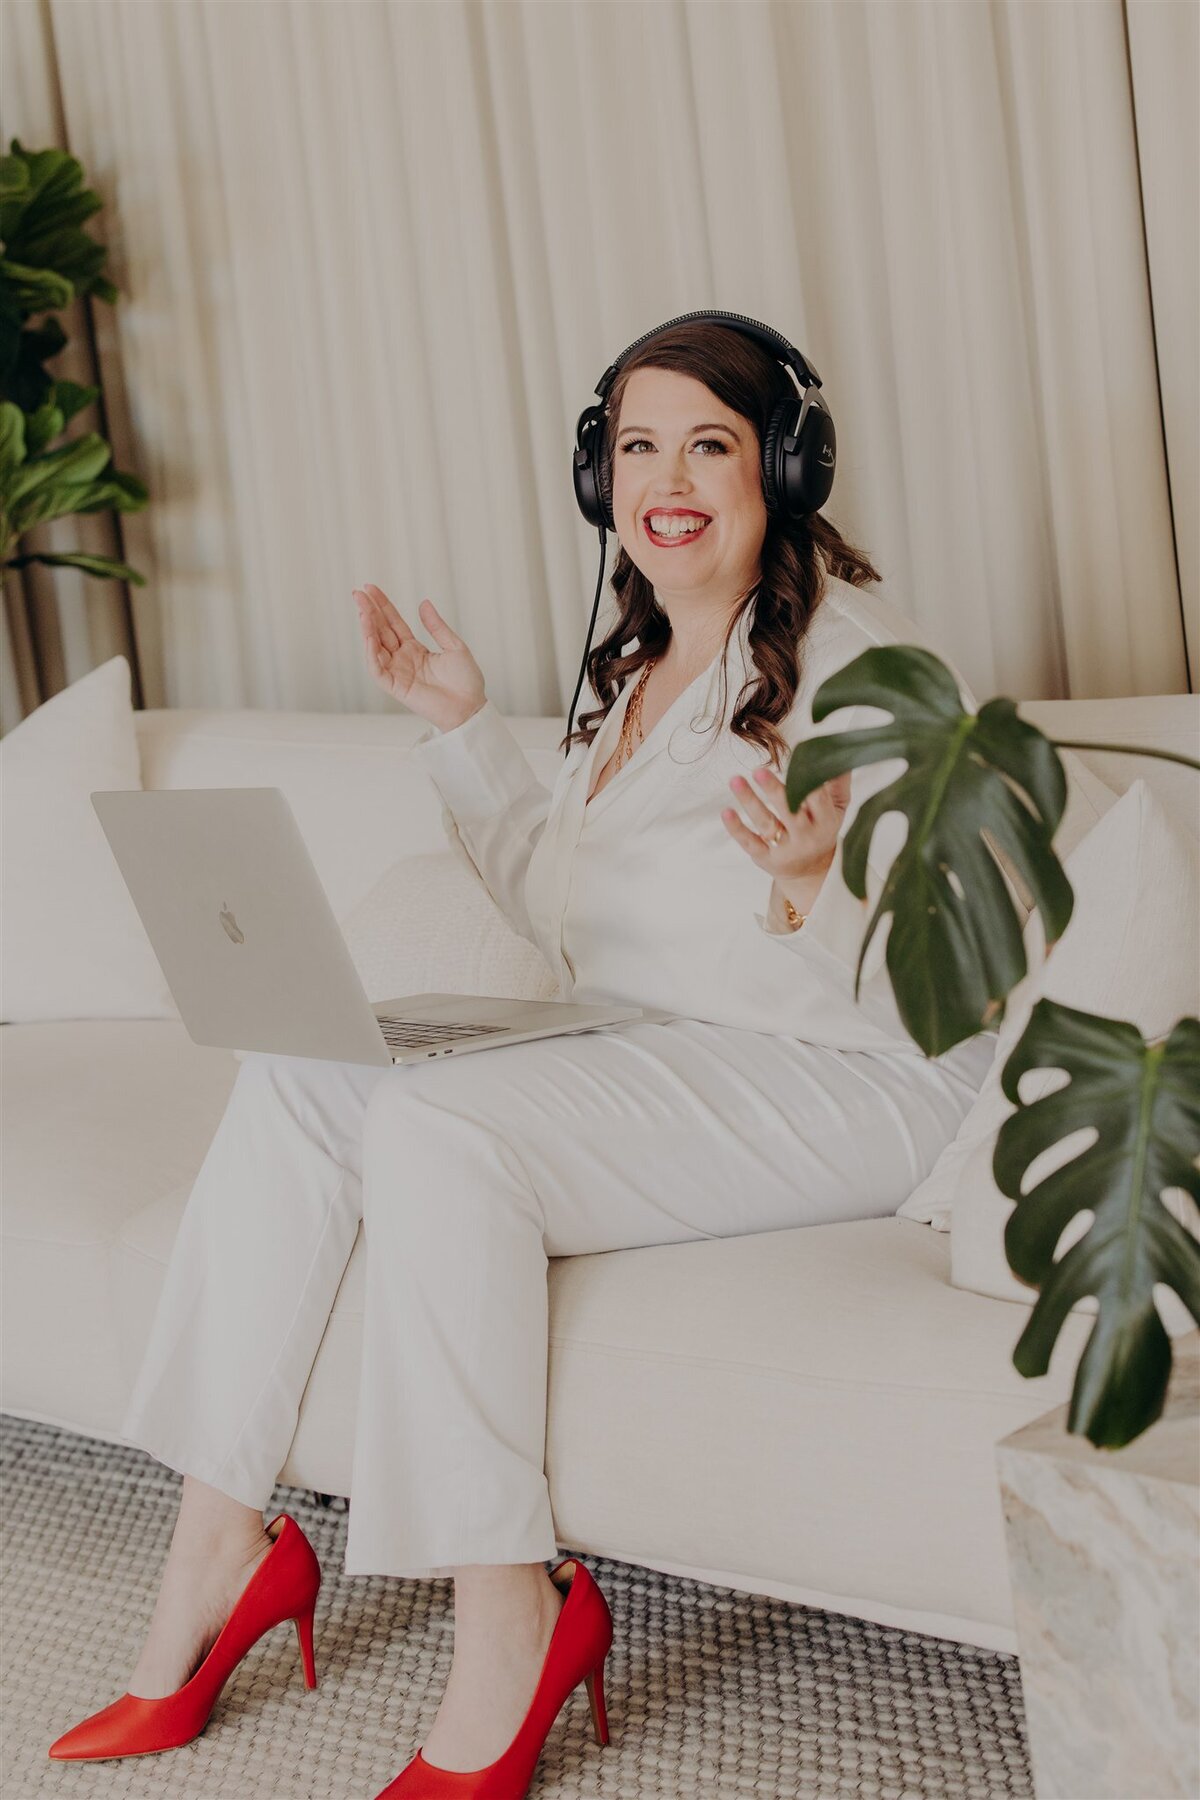 relationship counselor in an all white outfit and black headphones sitting with laptop on lap